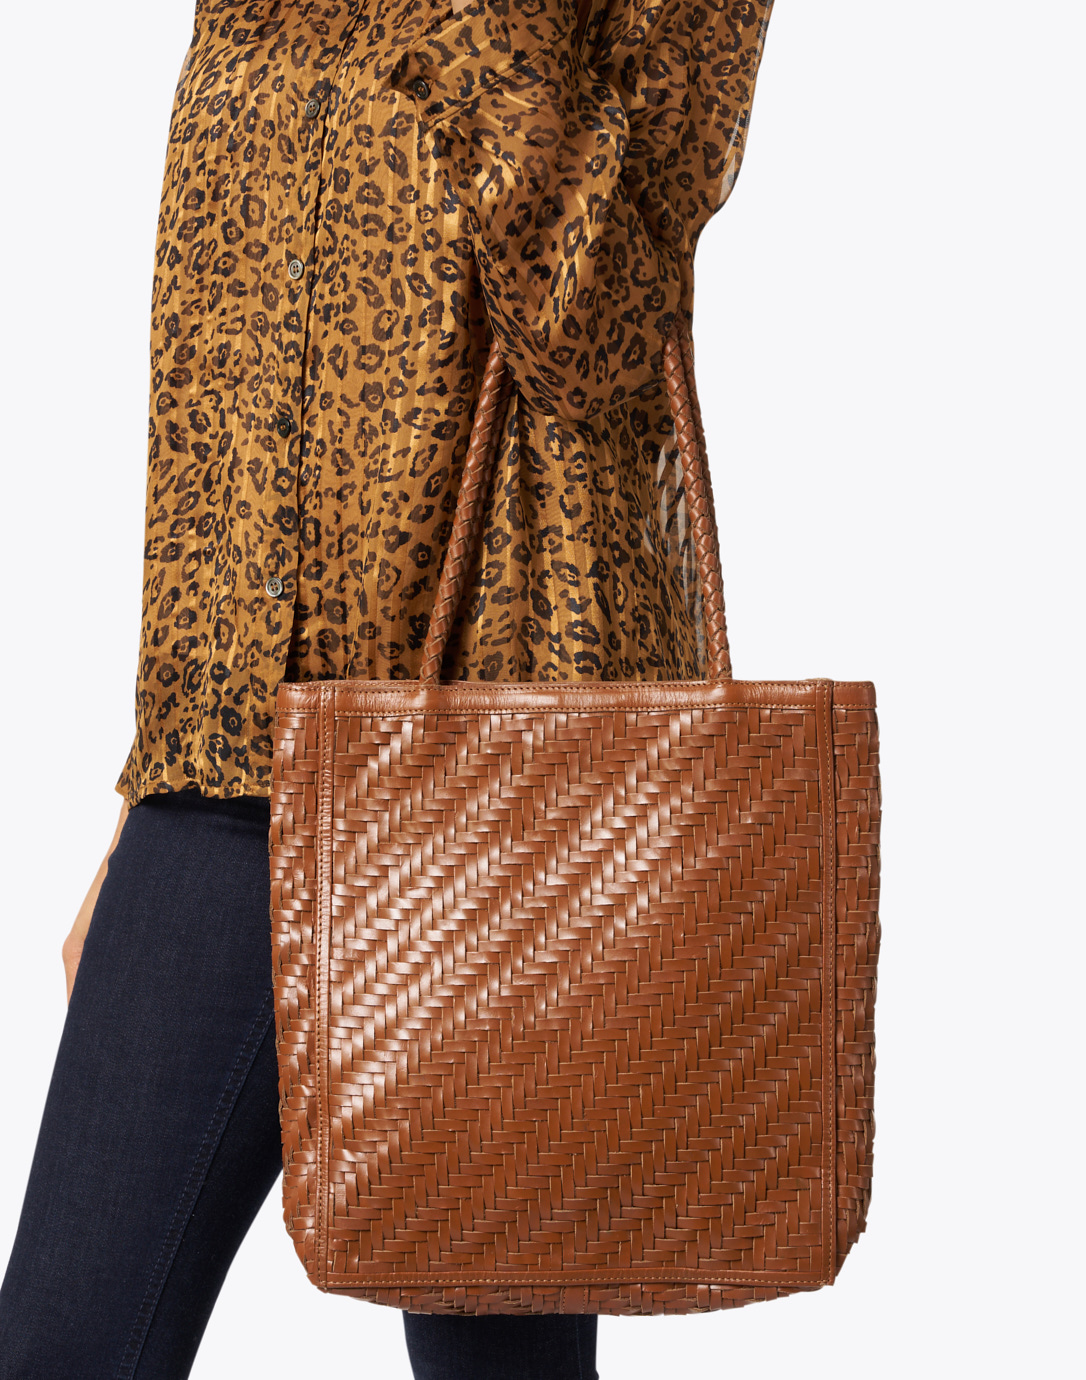 Bembien Le Tote - Sienna, Woven Leather Tote Bag